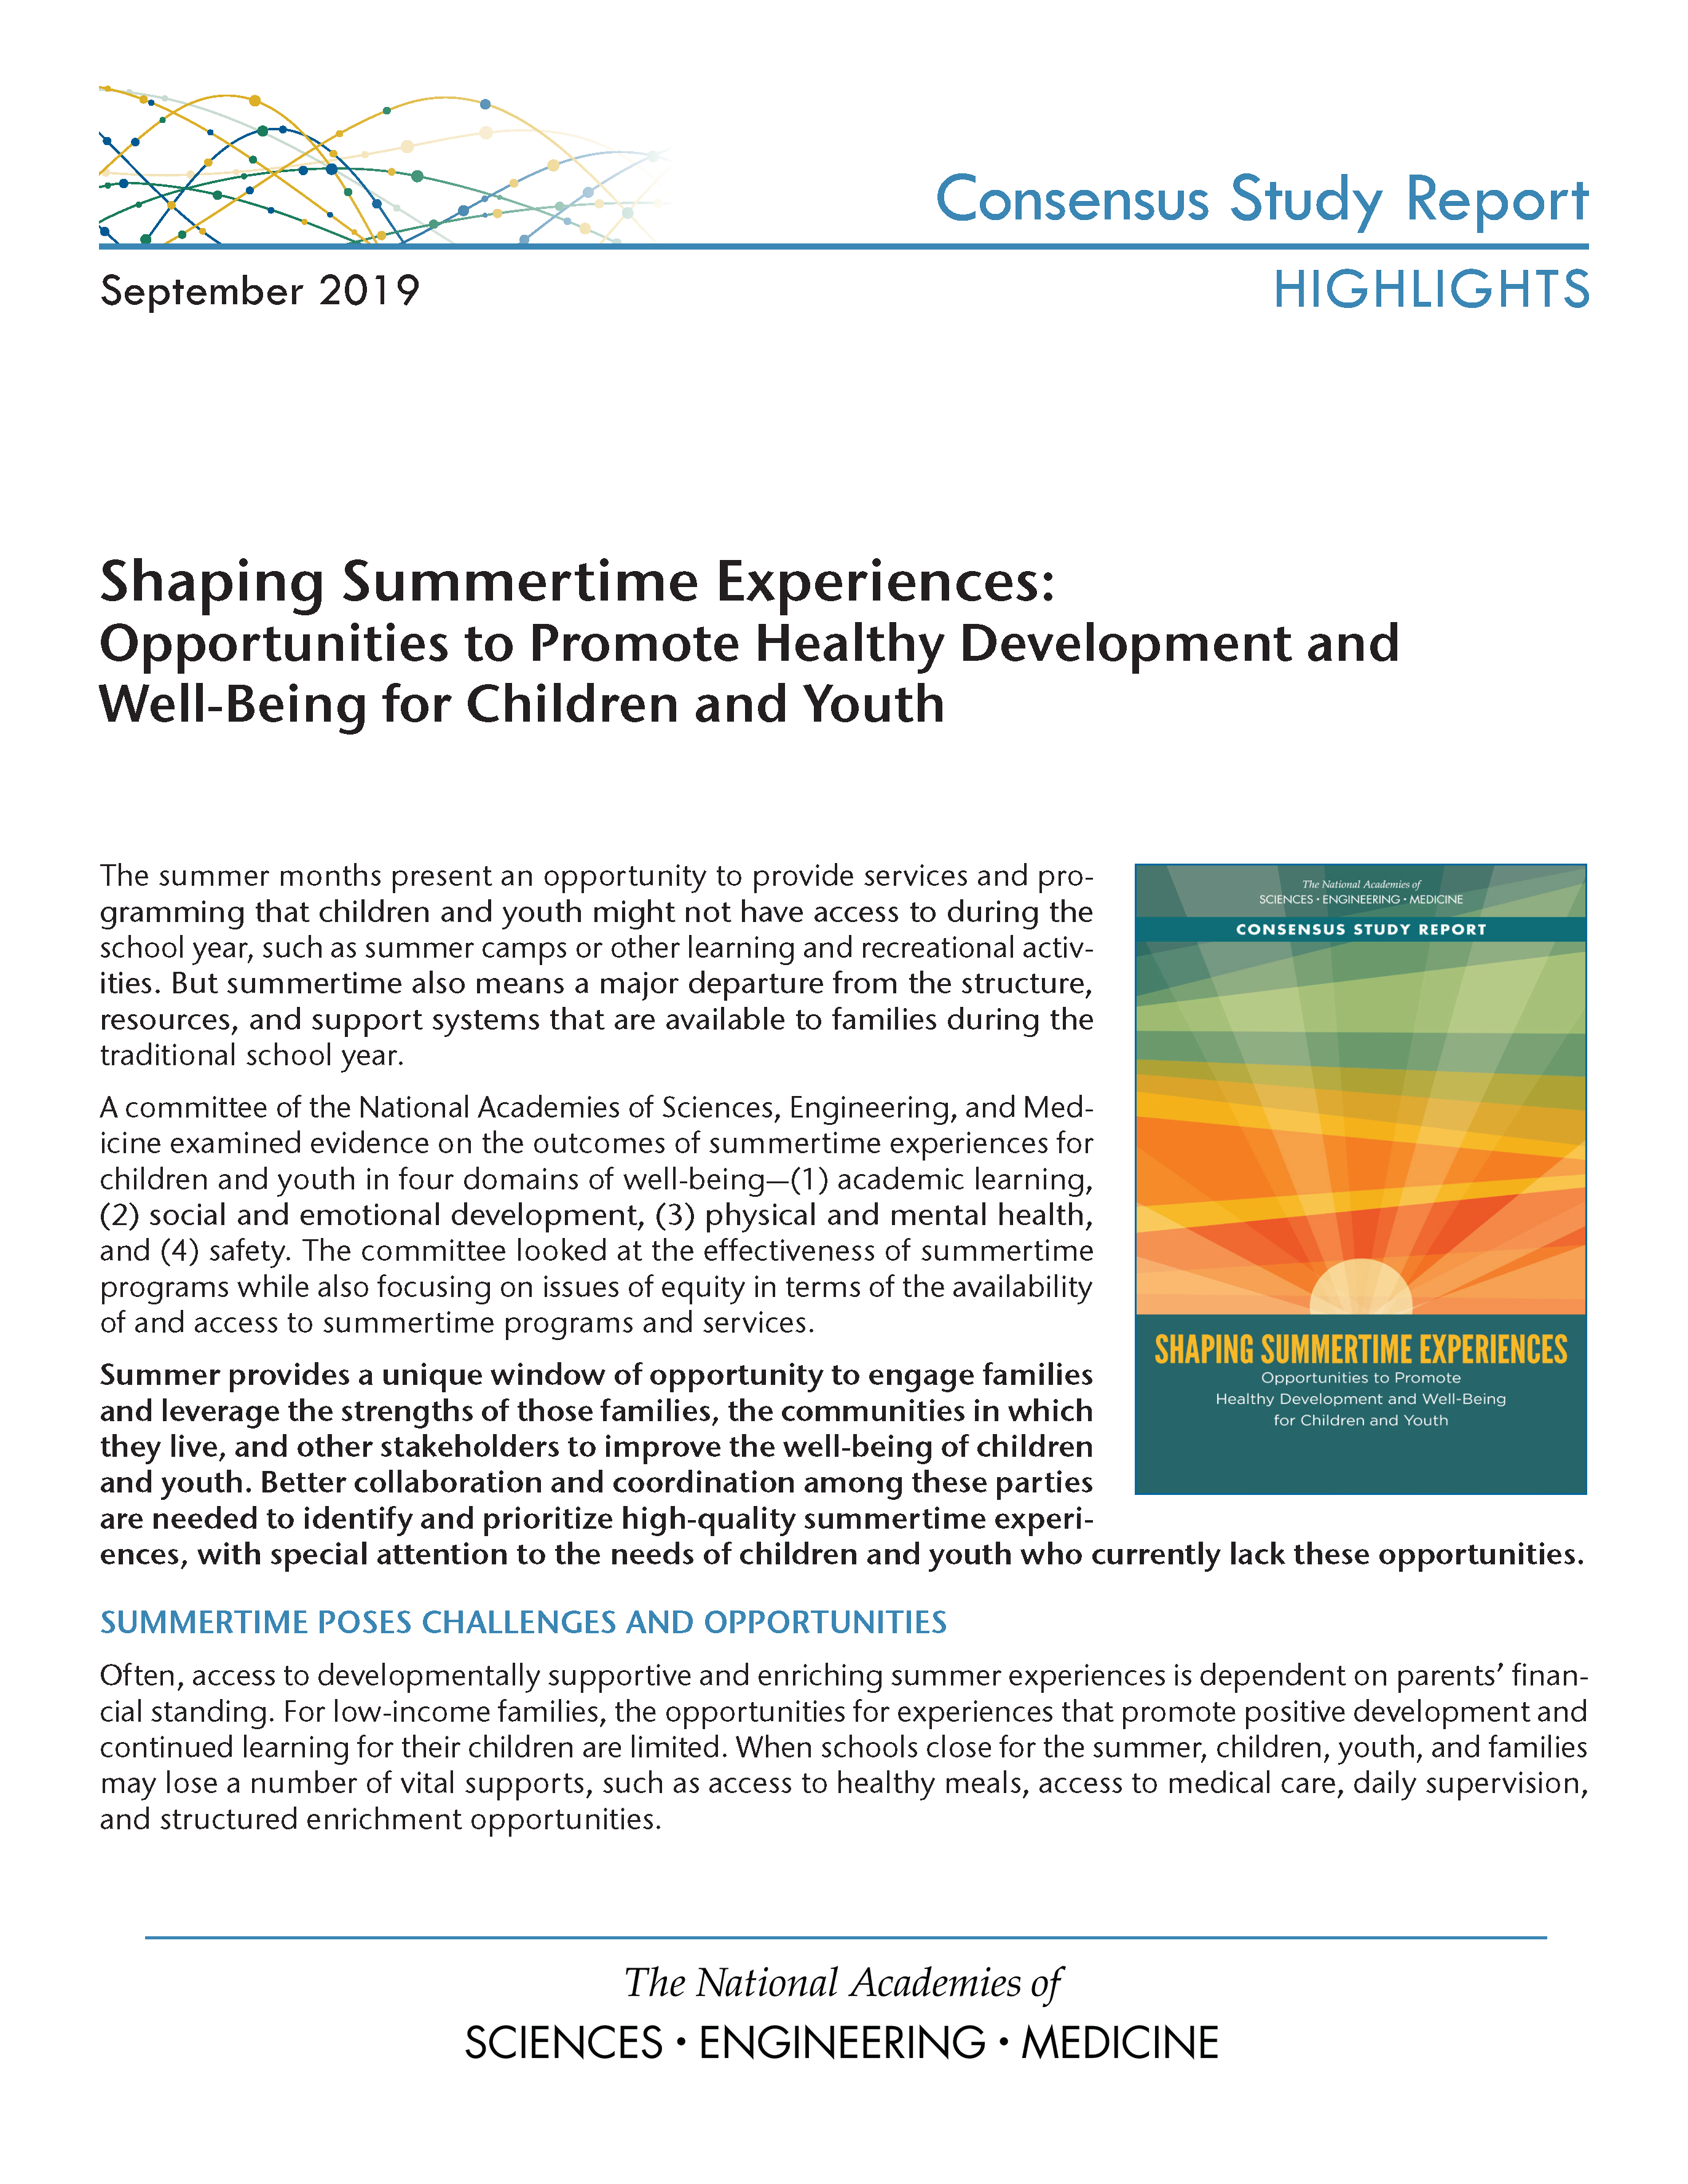 Shaping Summertime Experiences: Opportunities to Promote Healthy  Development and Well-Being for Children and Youth